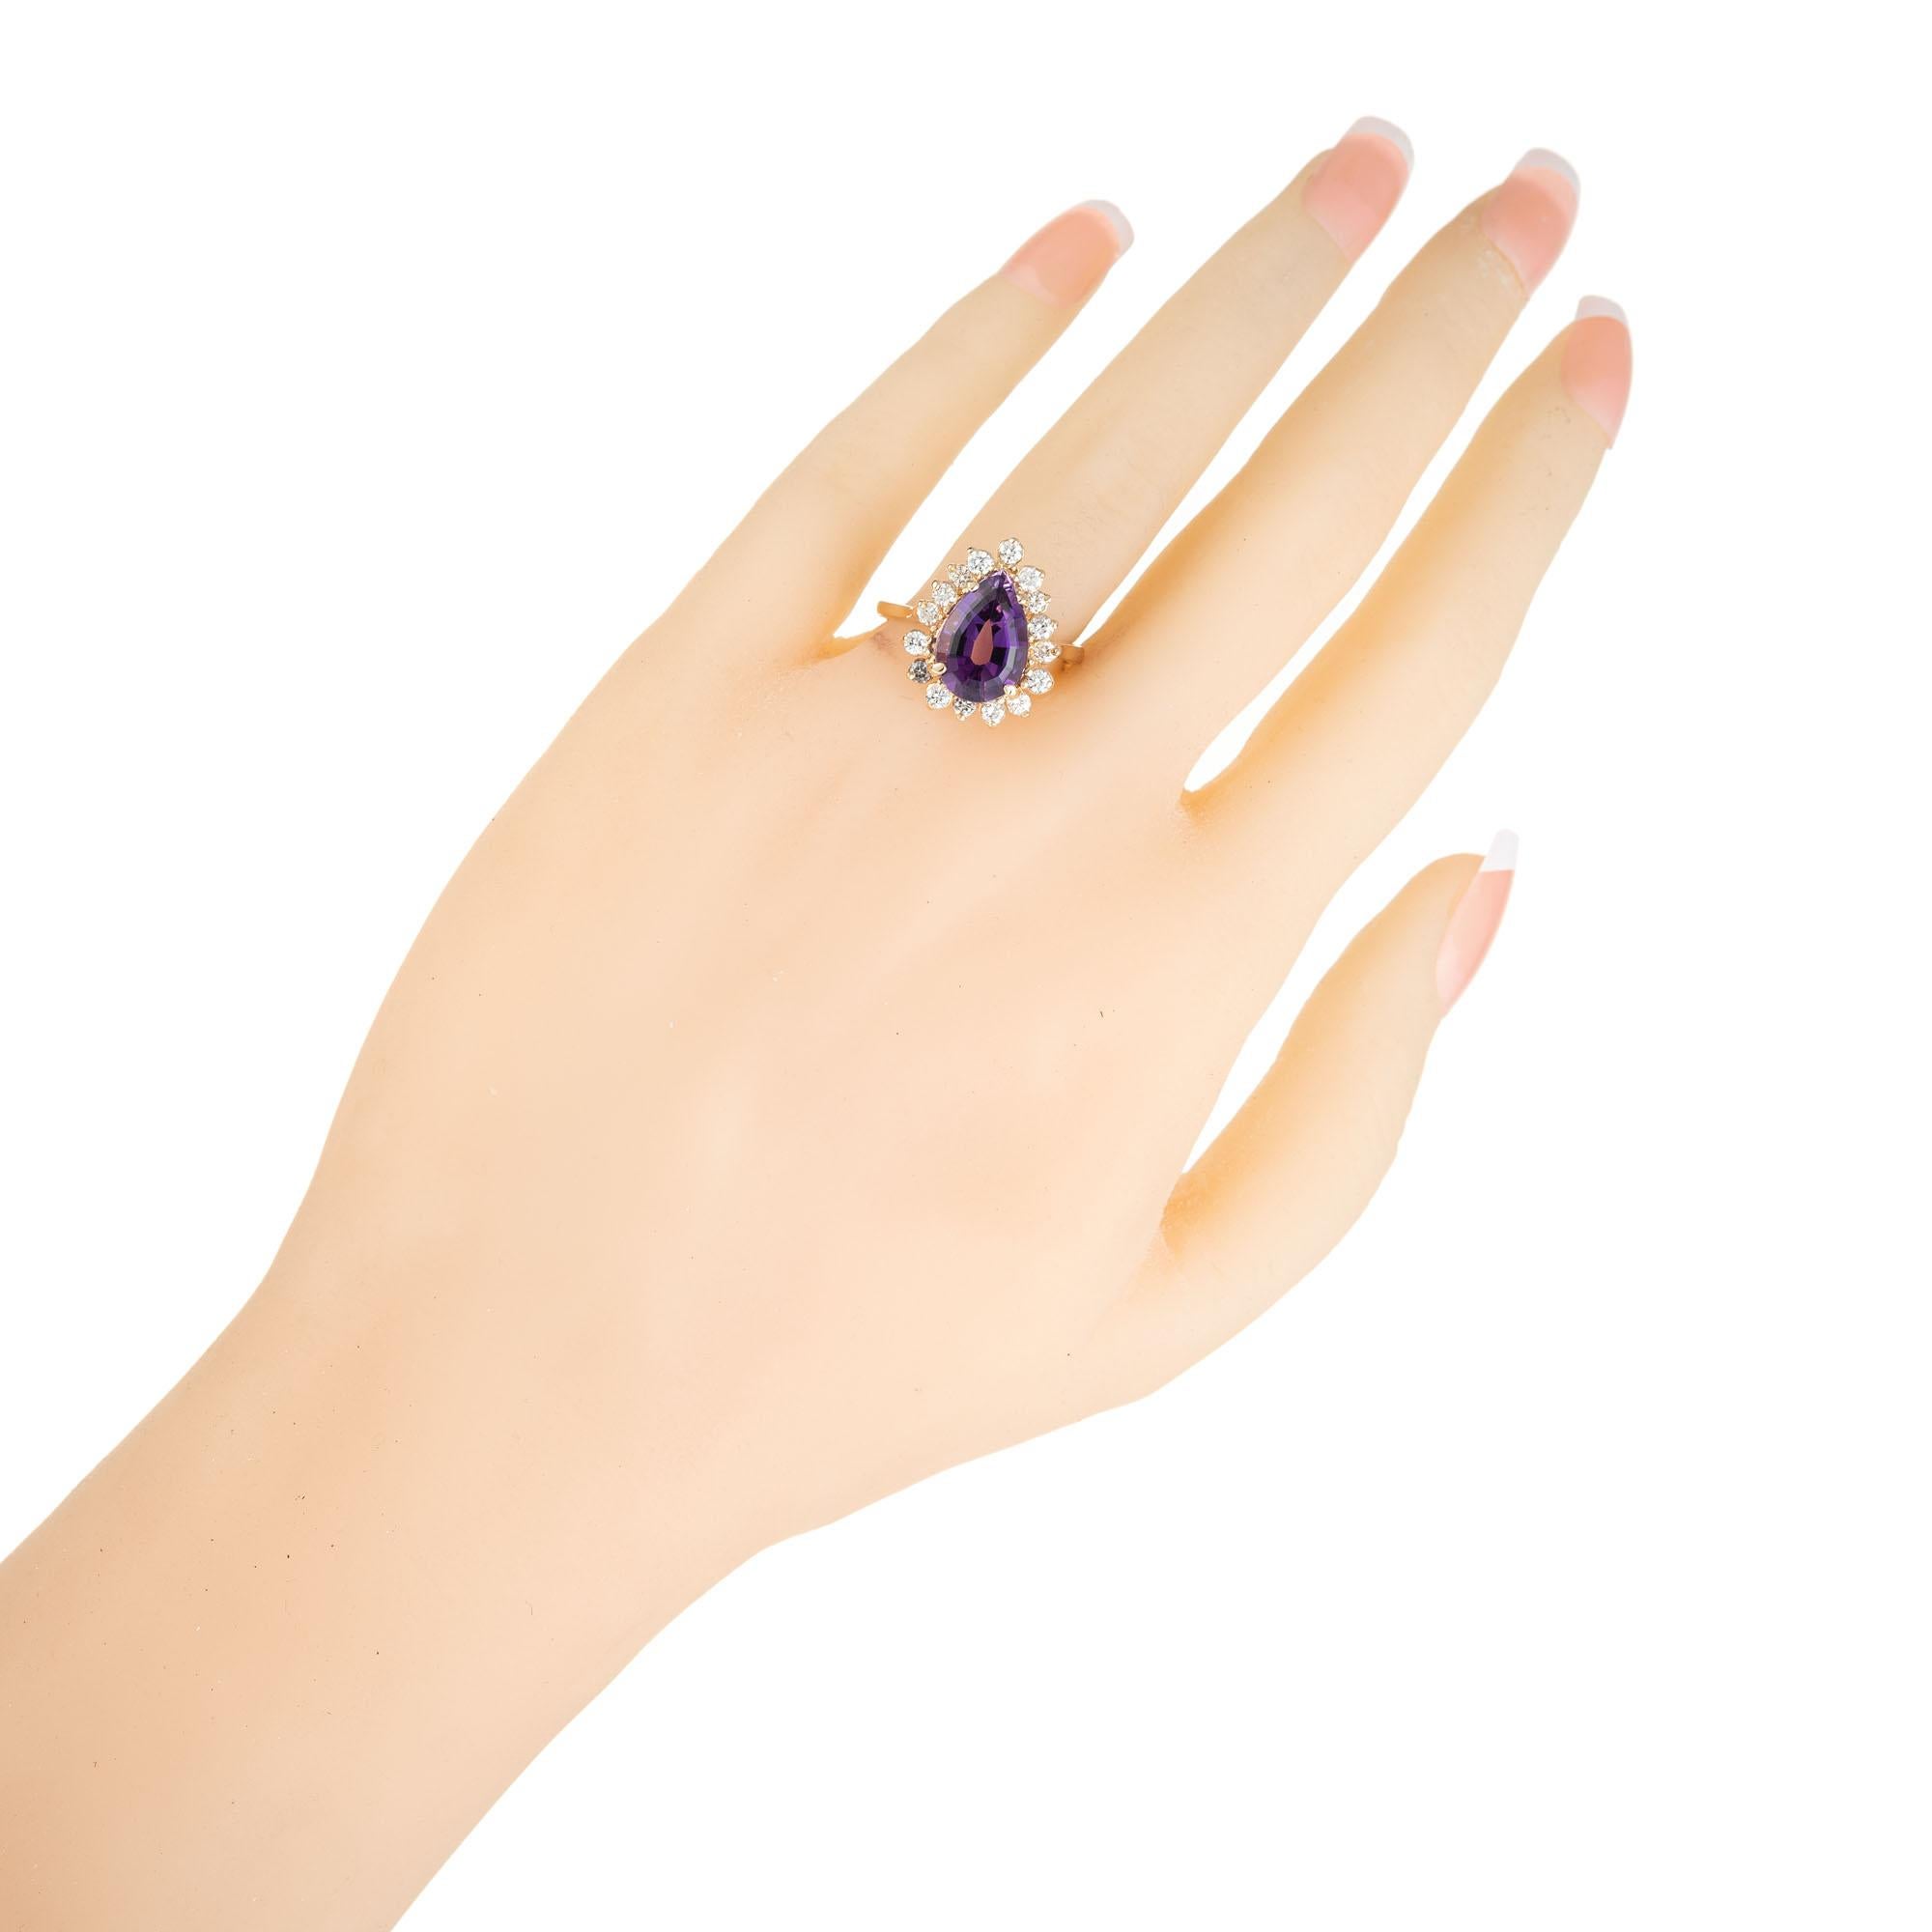 2.65 Carat Pear Shaped Natural Amethyst Diamond Halo Gold Ring In Good Condition For Sale In Stamford, CT